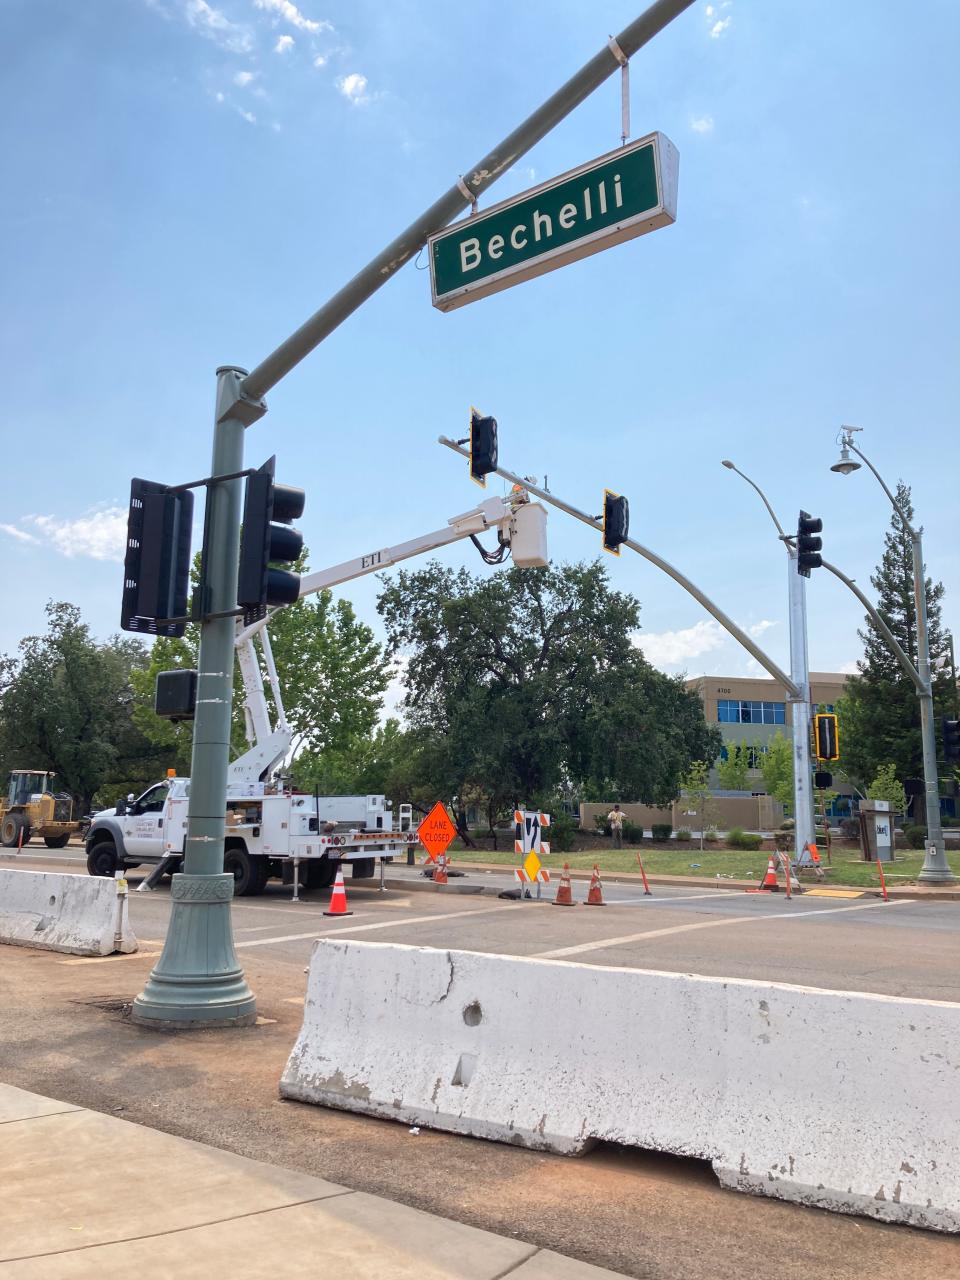 New traffic lights have been installed at the intersection of Bechelli Lane and the Blue Shield call center in Redding. Crews will take down the old signals on Tuesday, July 26, 2022.